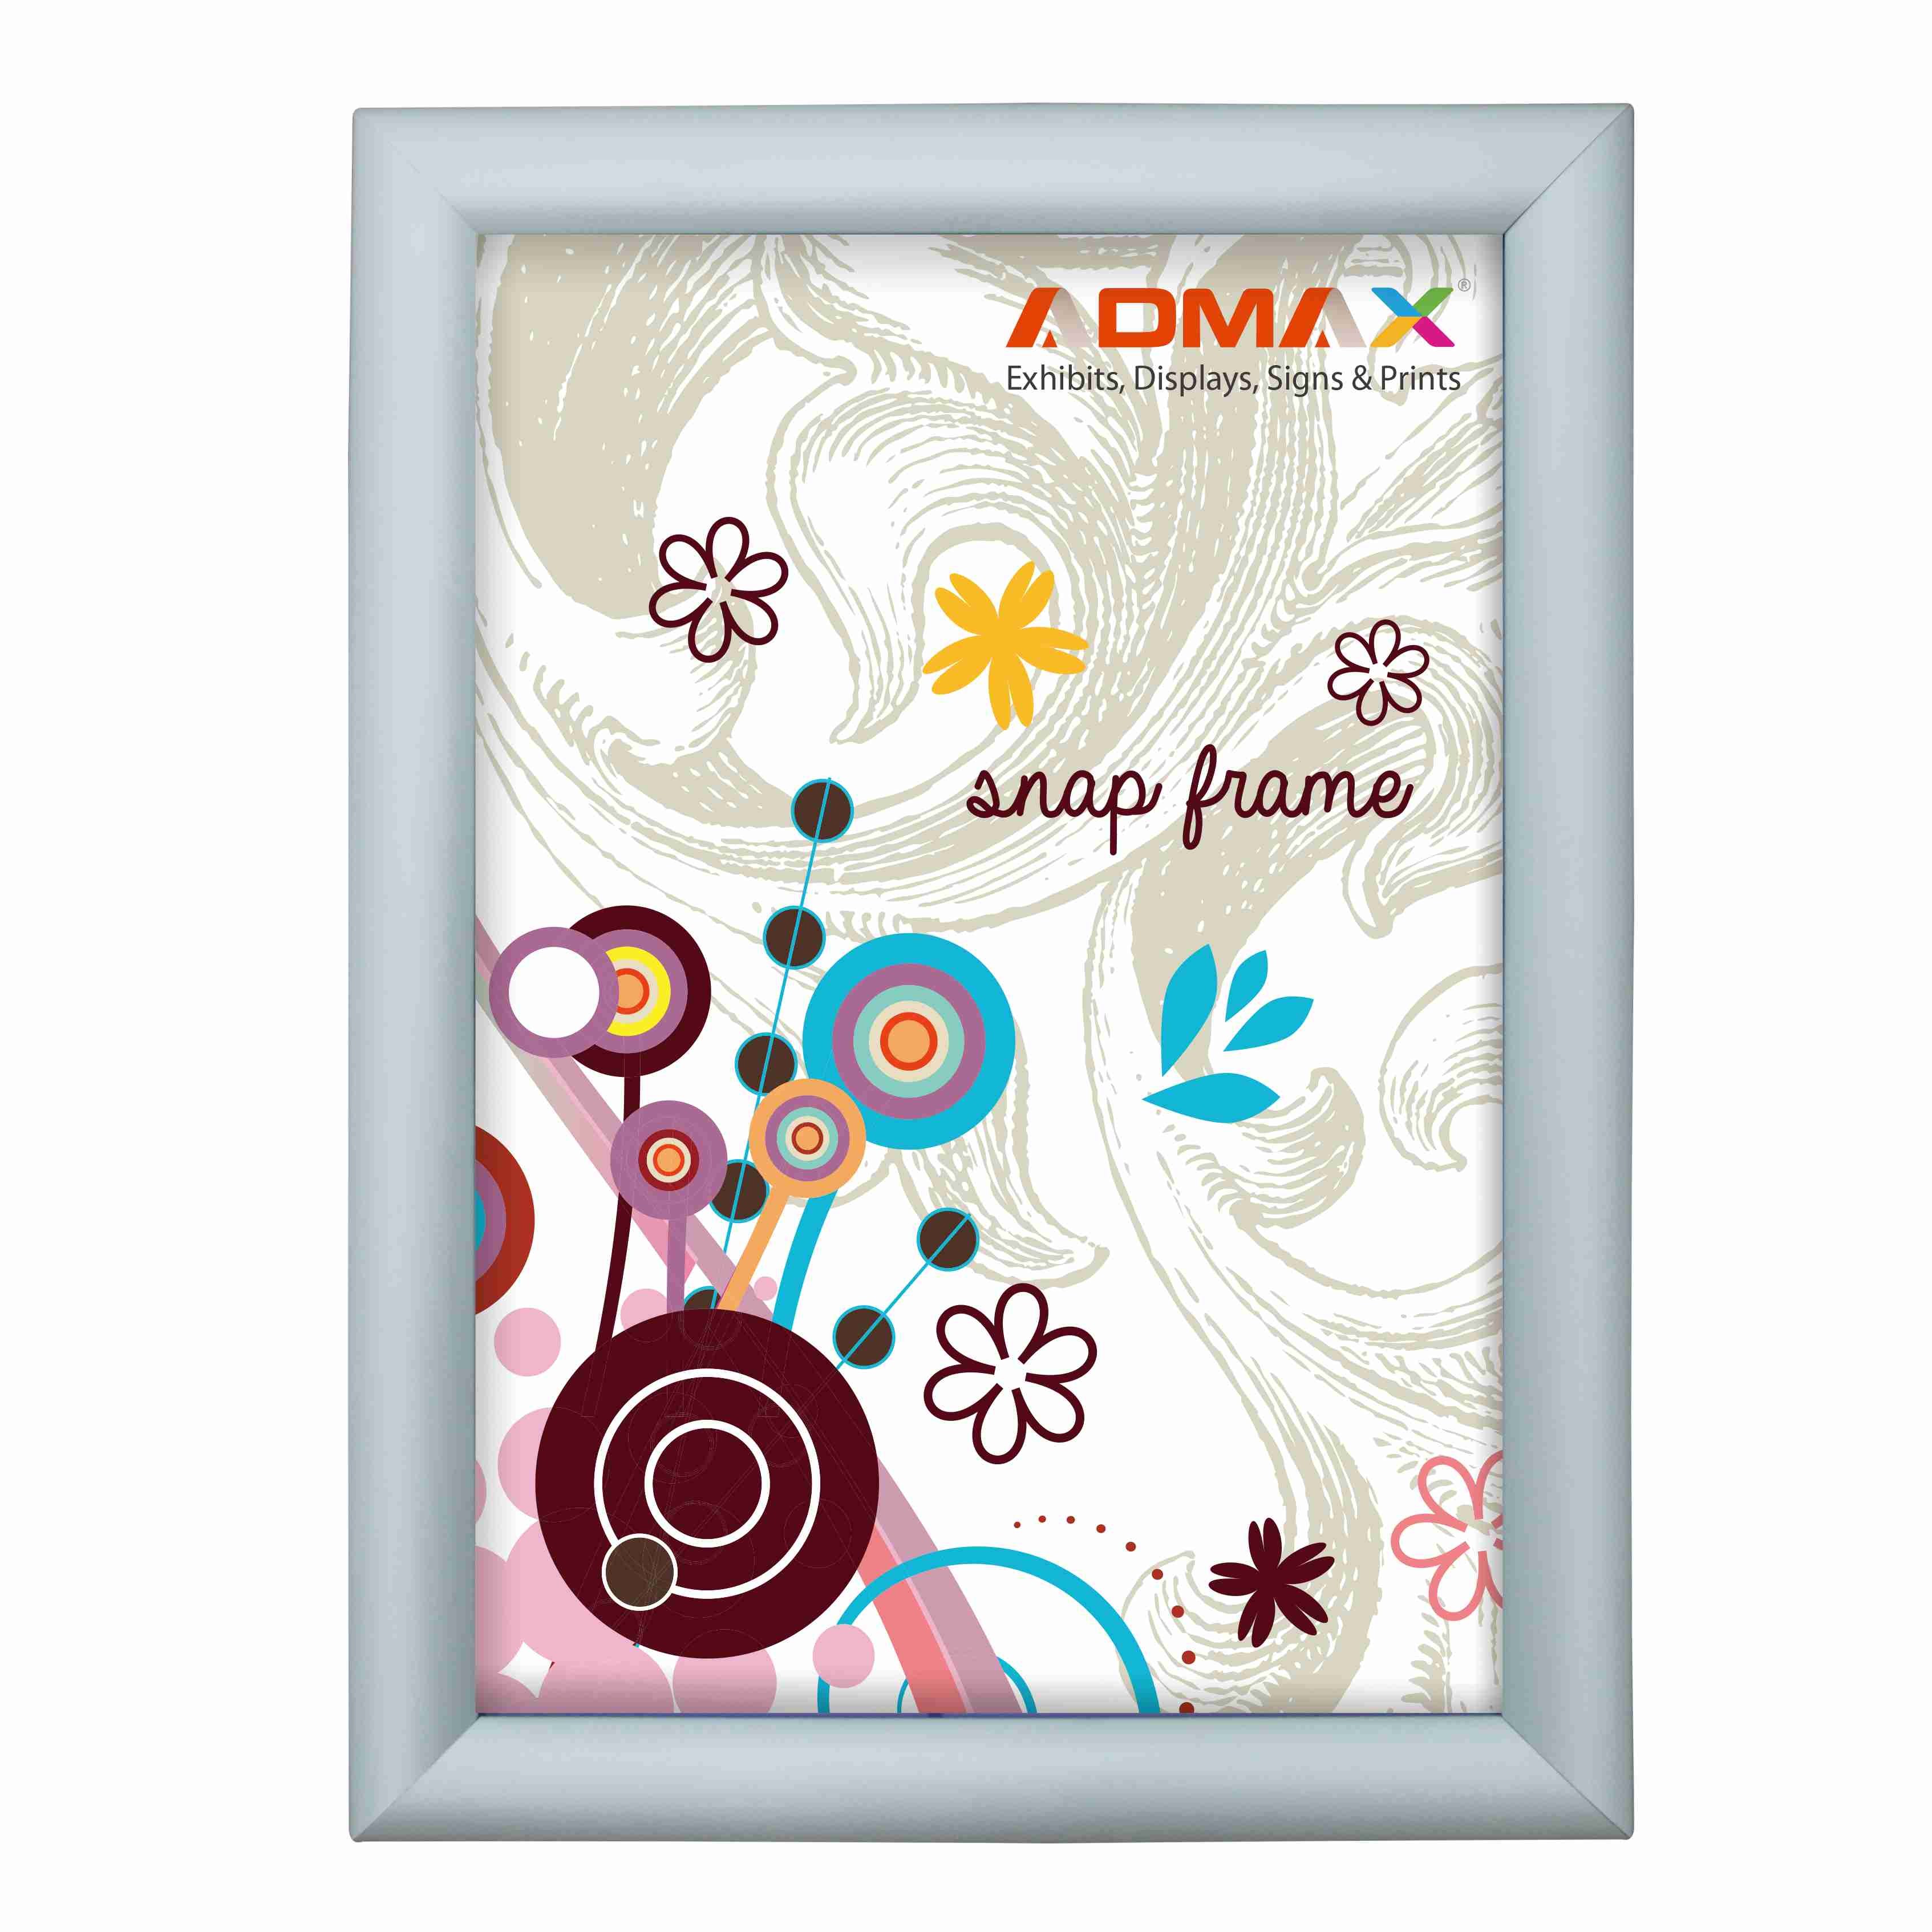  A1 Snap Display Frames , Indoor Advertising Changeable Poster Frames Manufactures